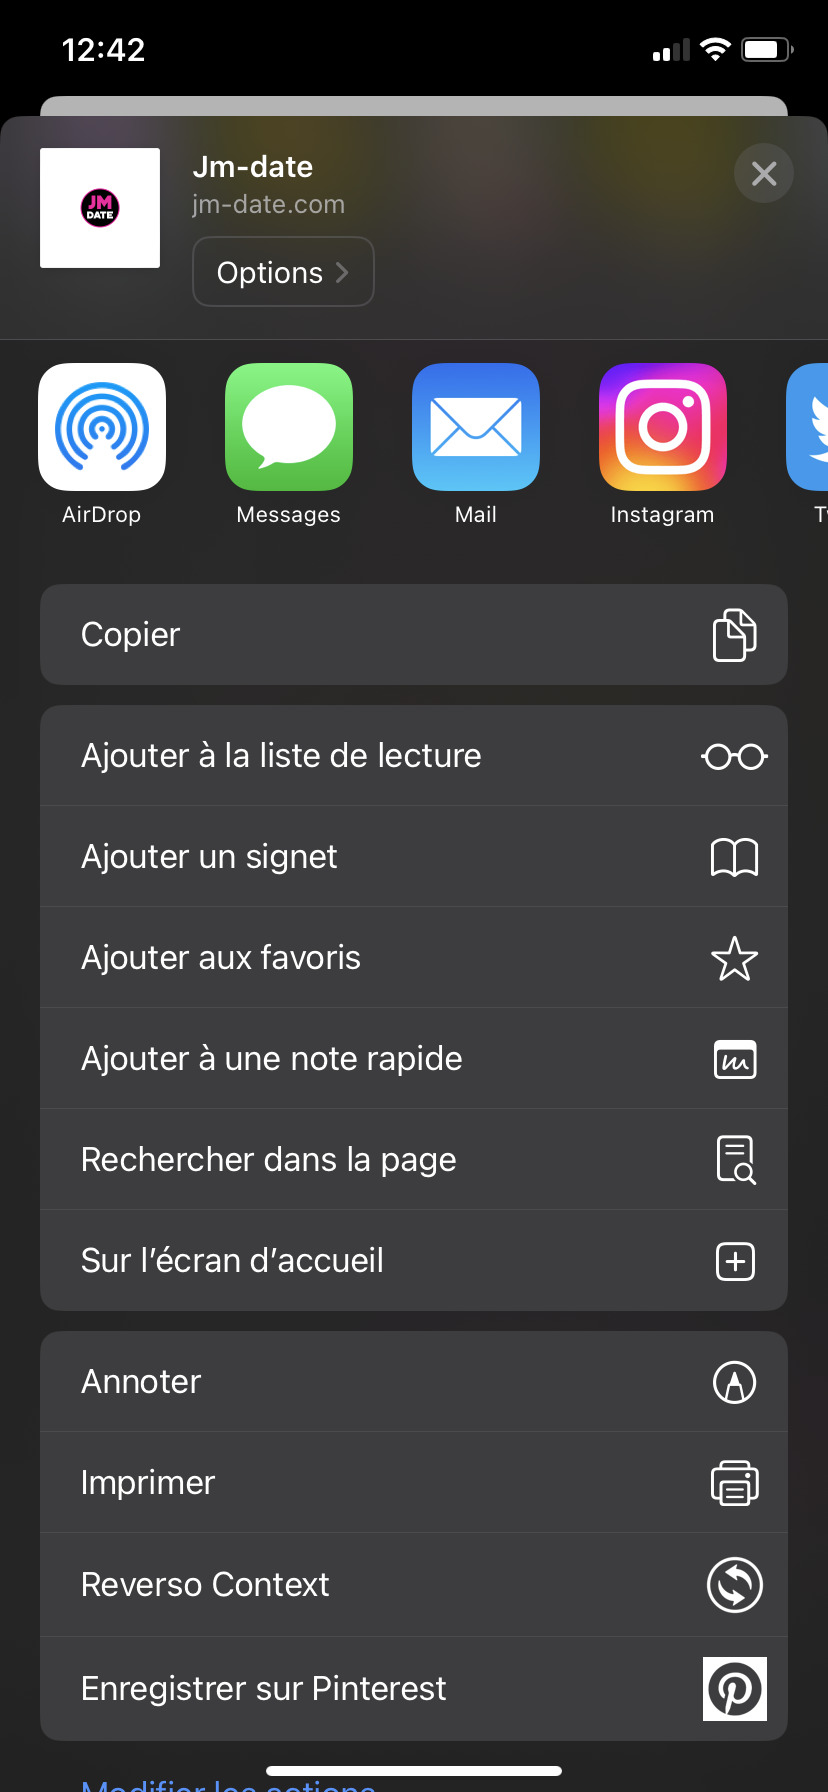 Jacquie et Michel contact: on the IOS home screen